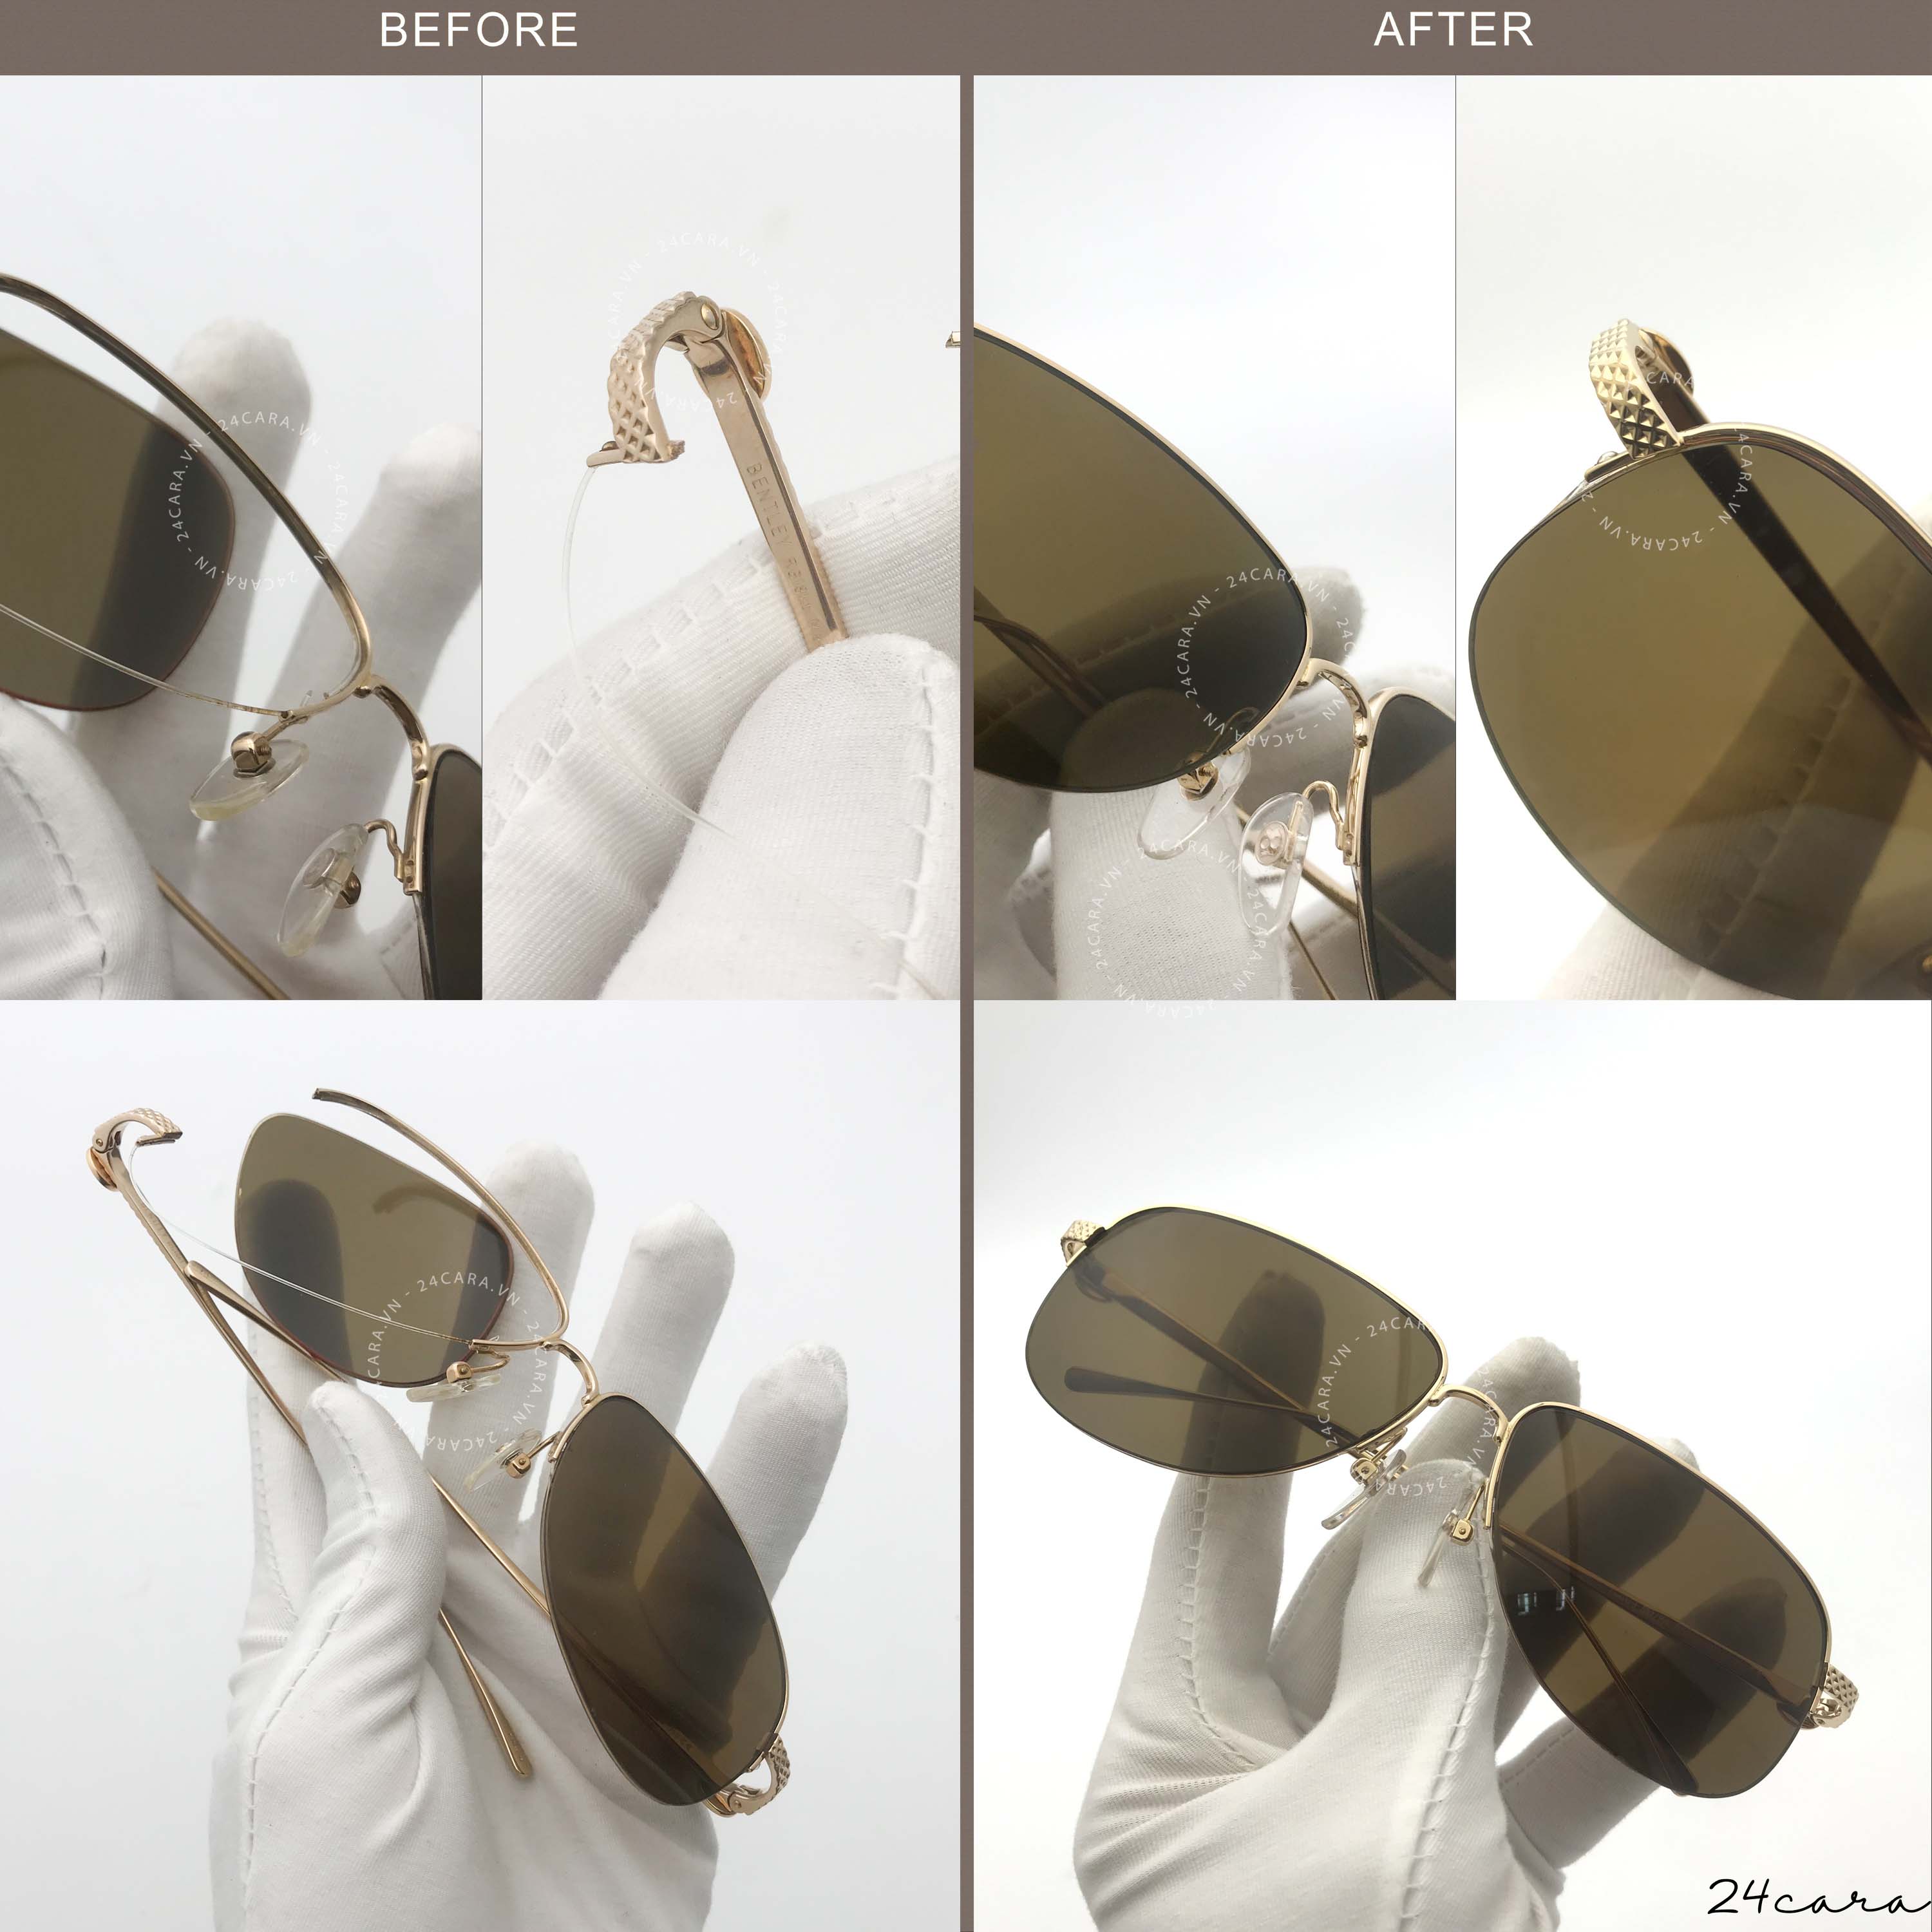 [GÓC SPA] BENTLEY SOLID GOLD 18K SUNGLASSES LIMITED EDITION